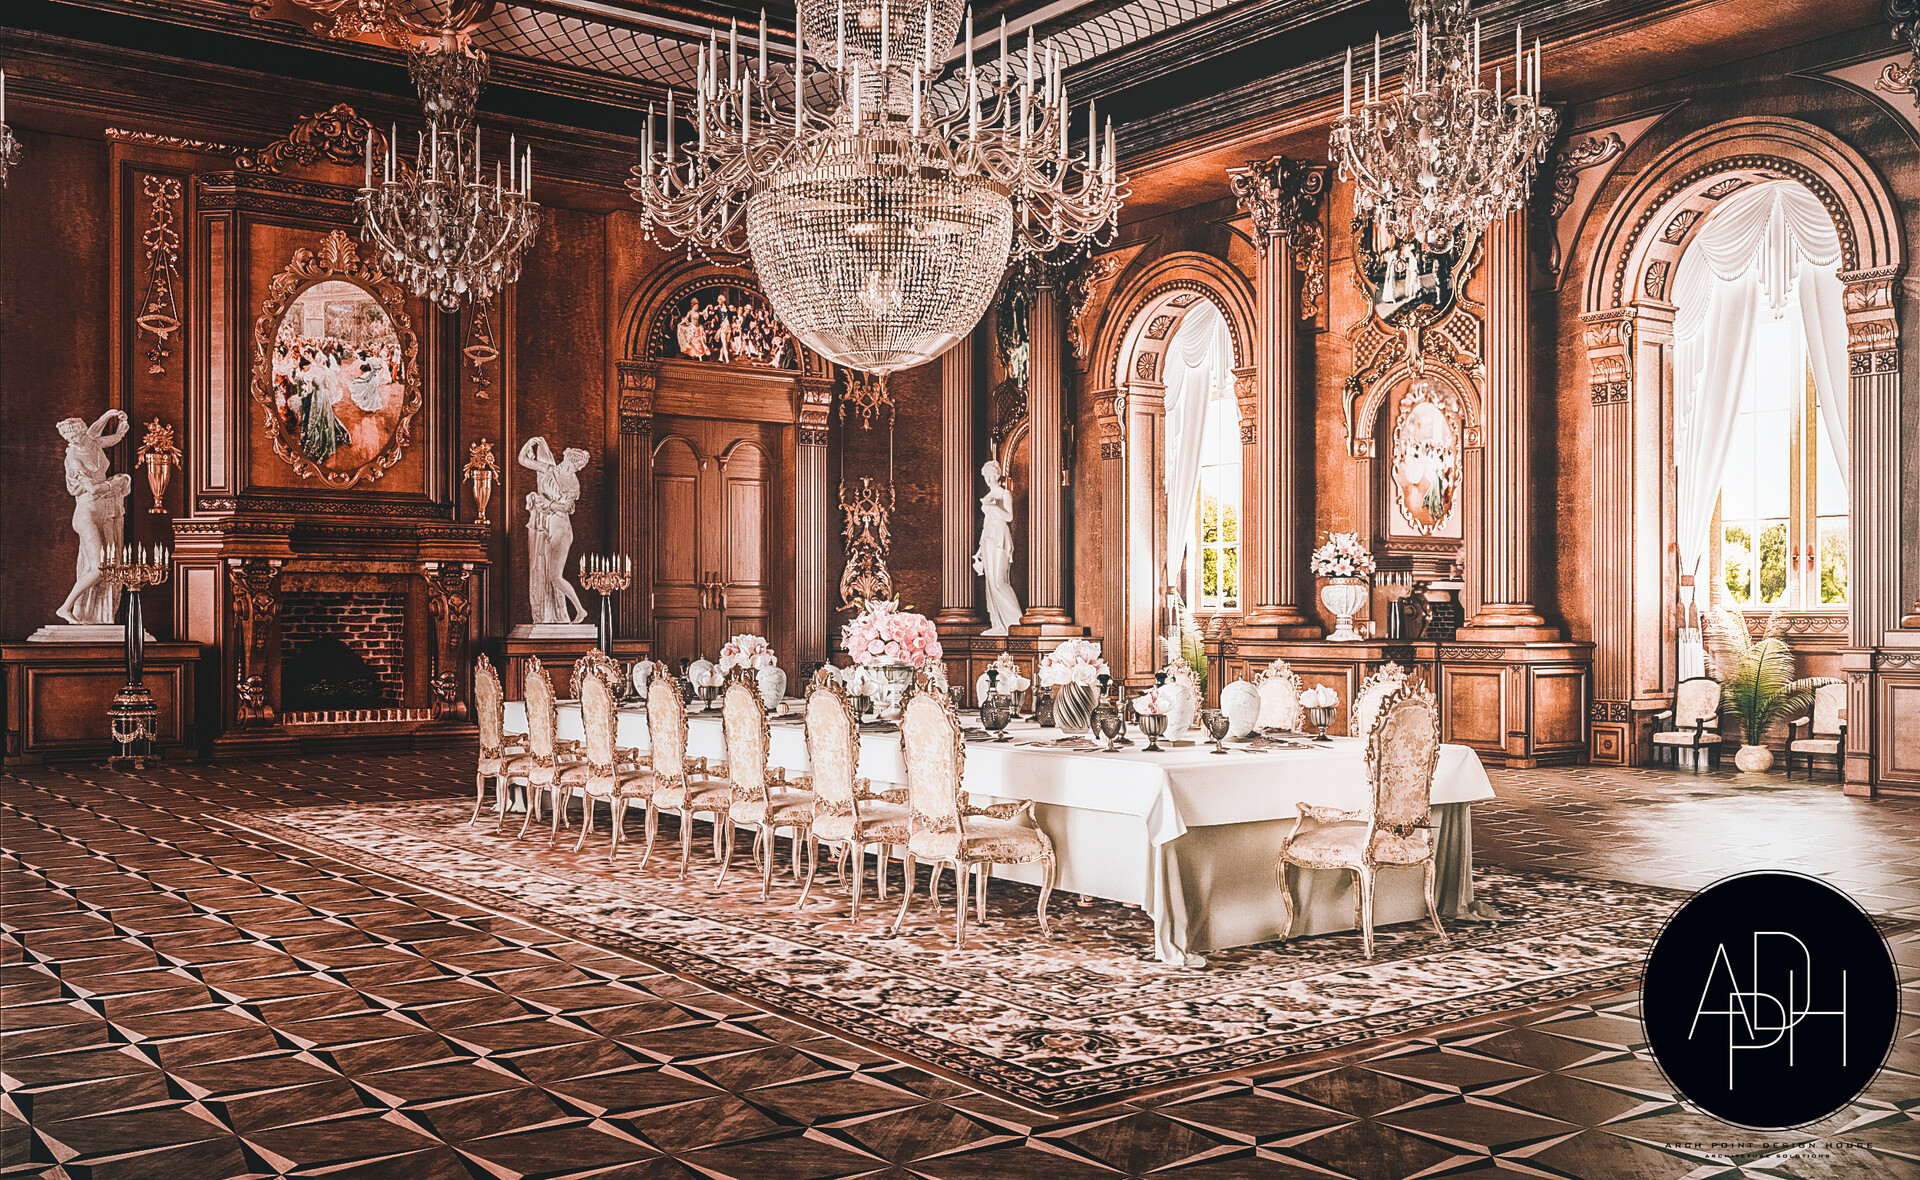 Dining Room In A Palace Is Called